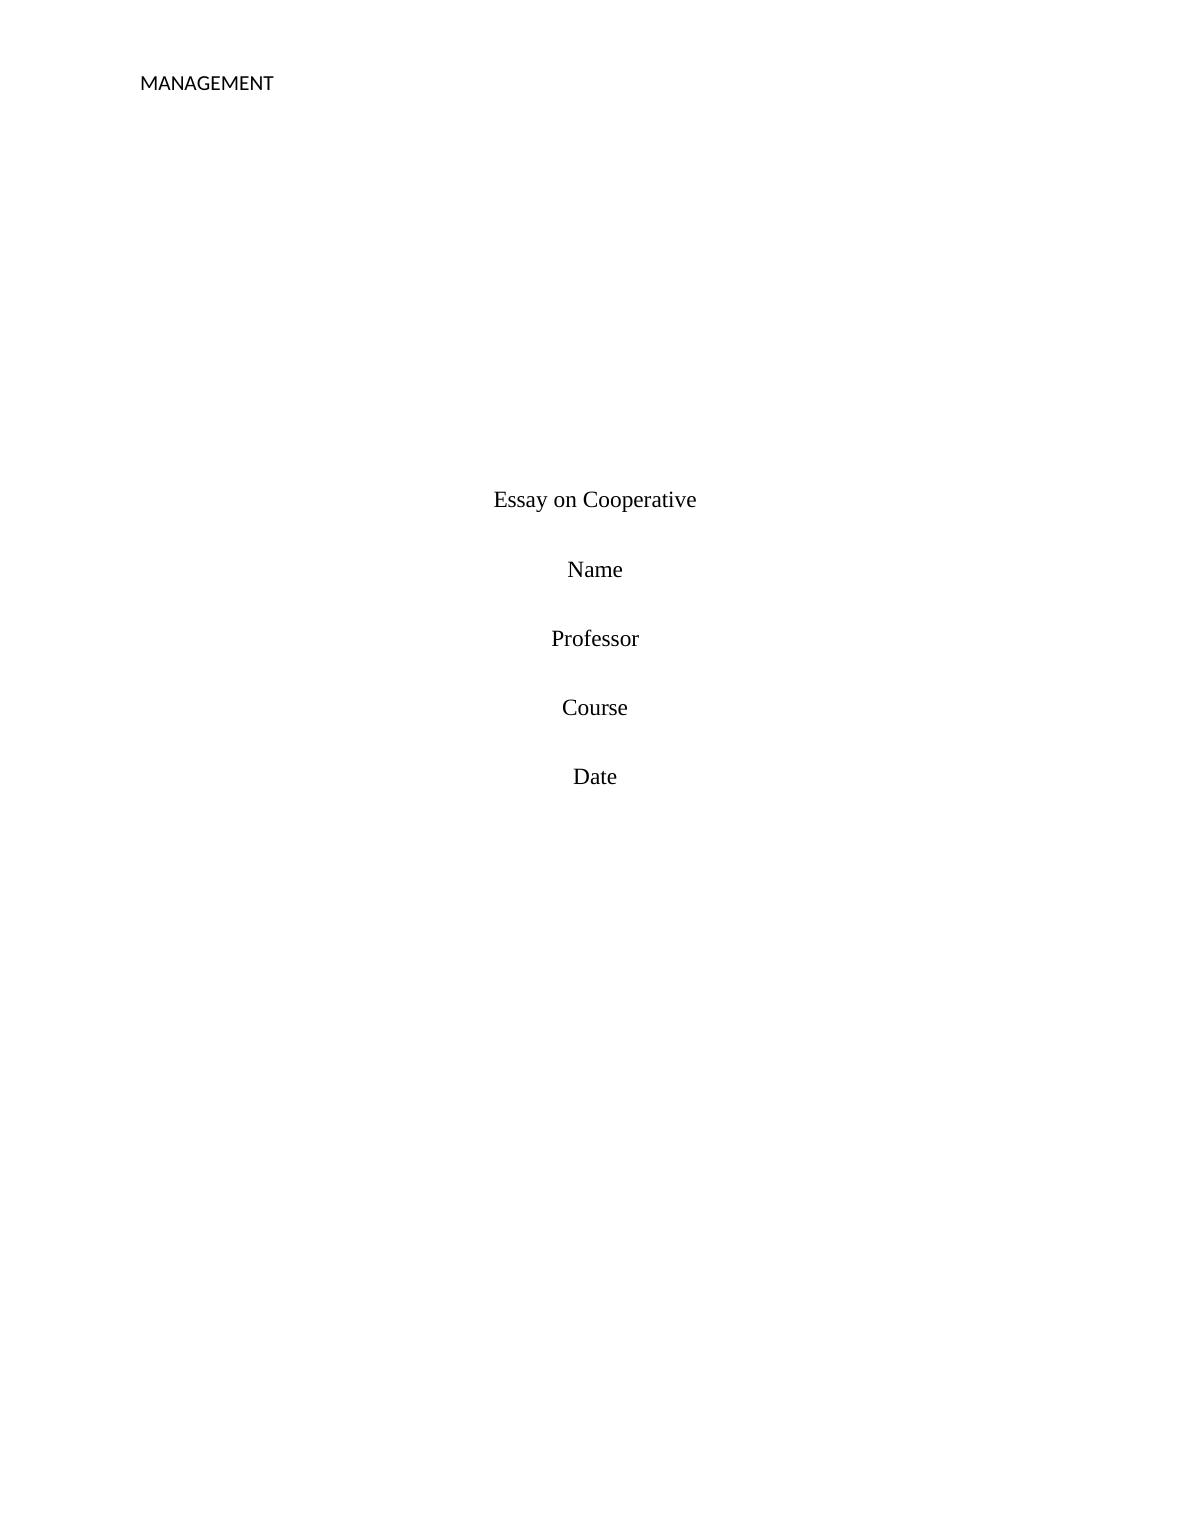 essay about cooperative management